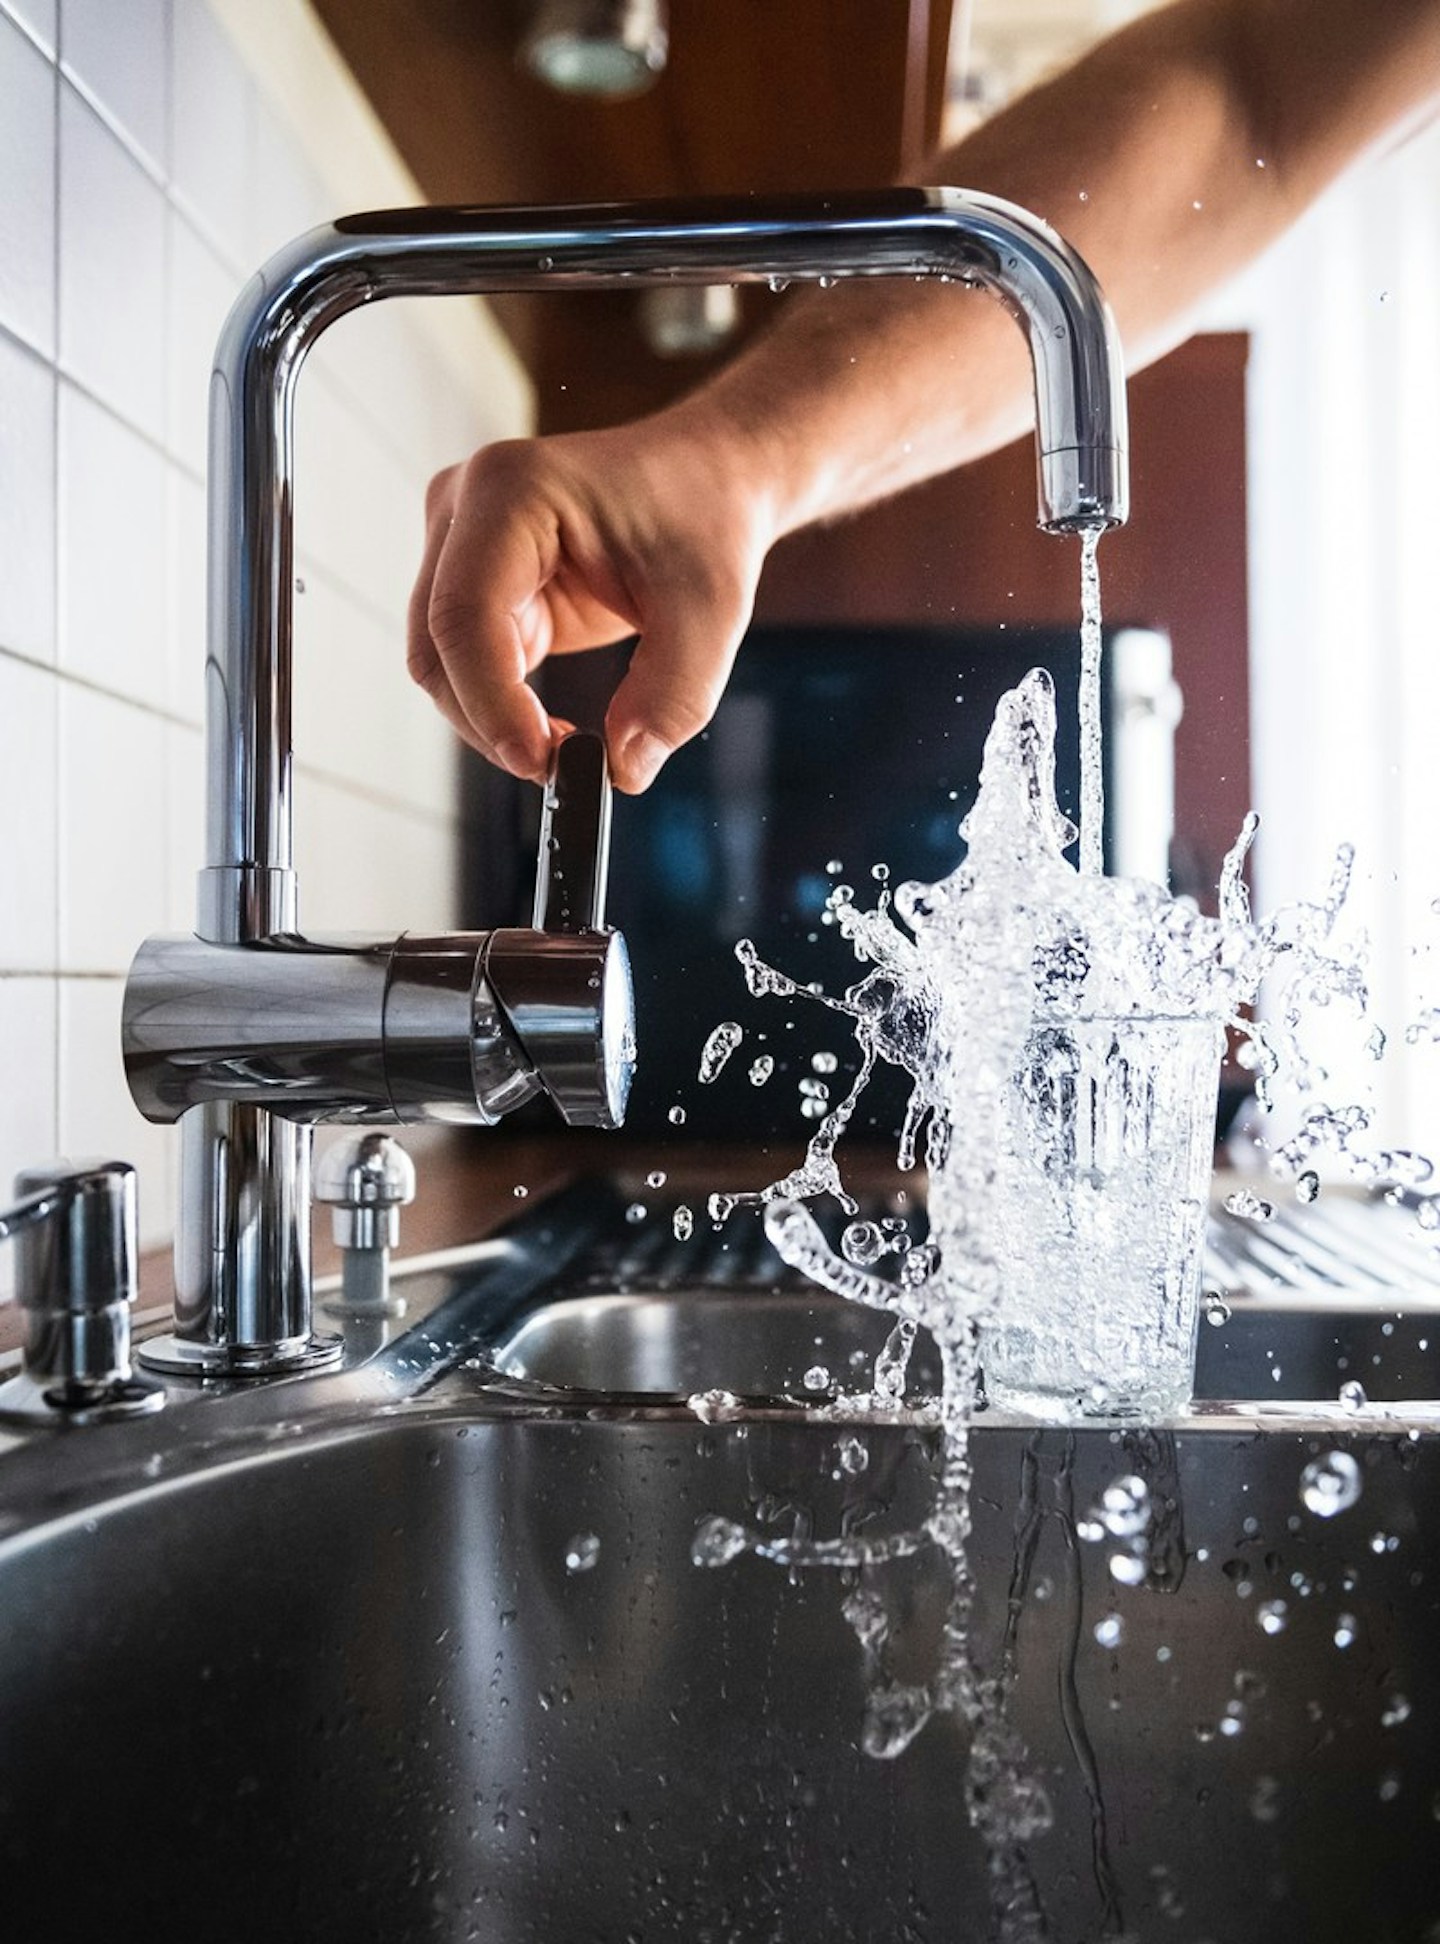 6 easy ways to have a sustainable life: close the faucet off